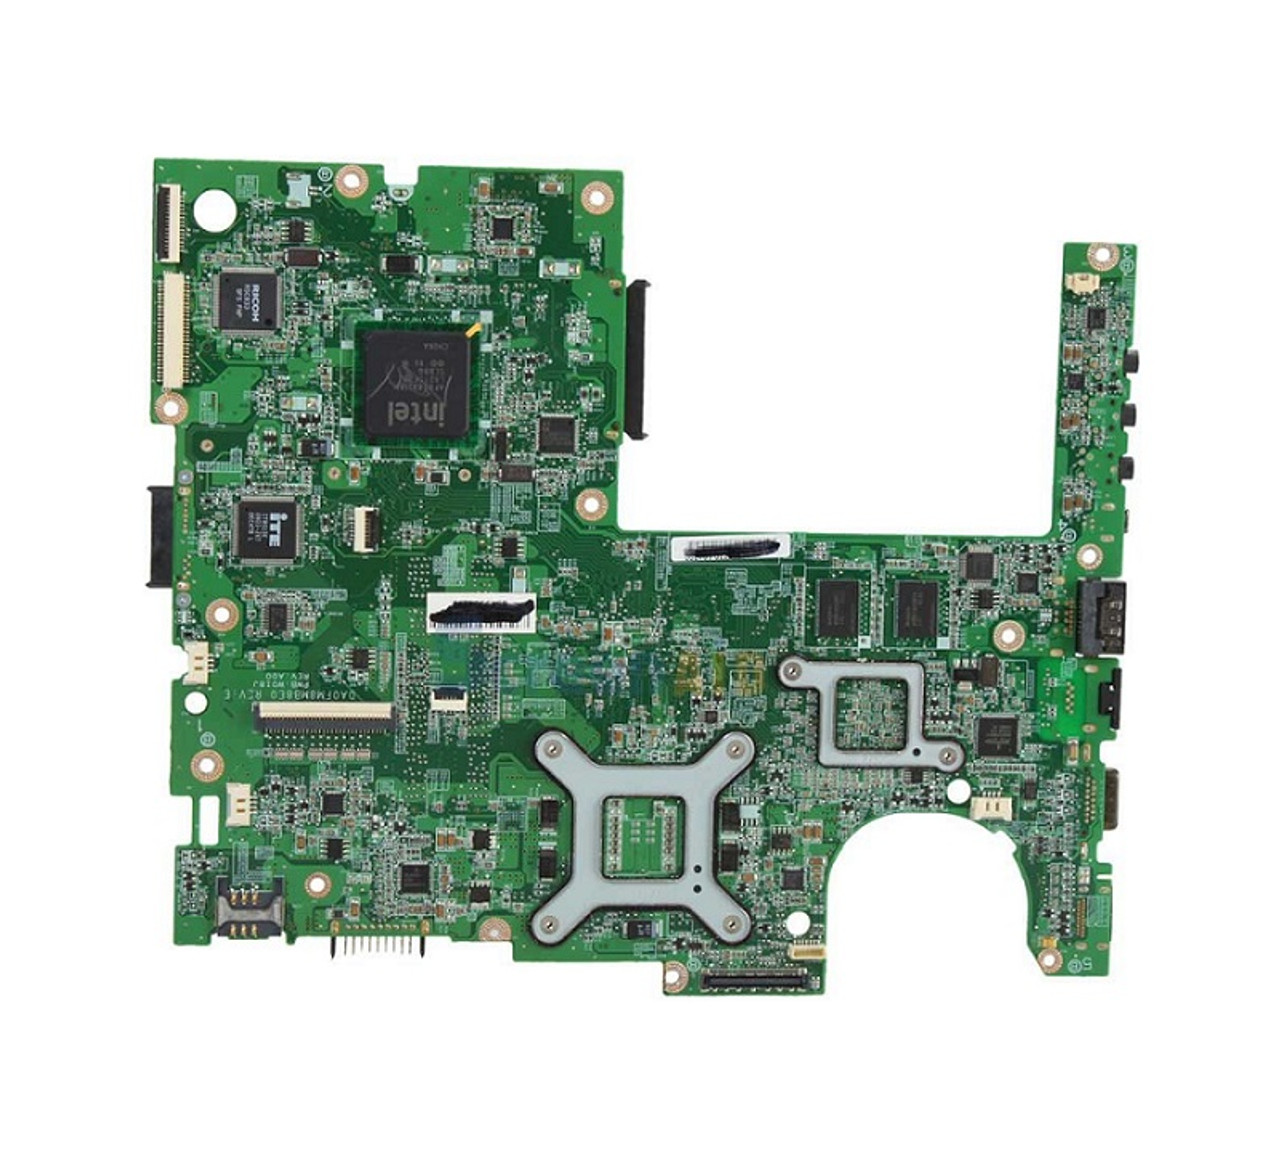 033ND0 - Dell System Board (Motherboard) AMD 2.1GHz (A10-5745M) with CPU for Inspiron 5535, M531r (Refurbished)